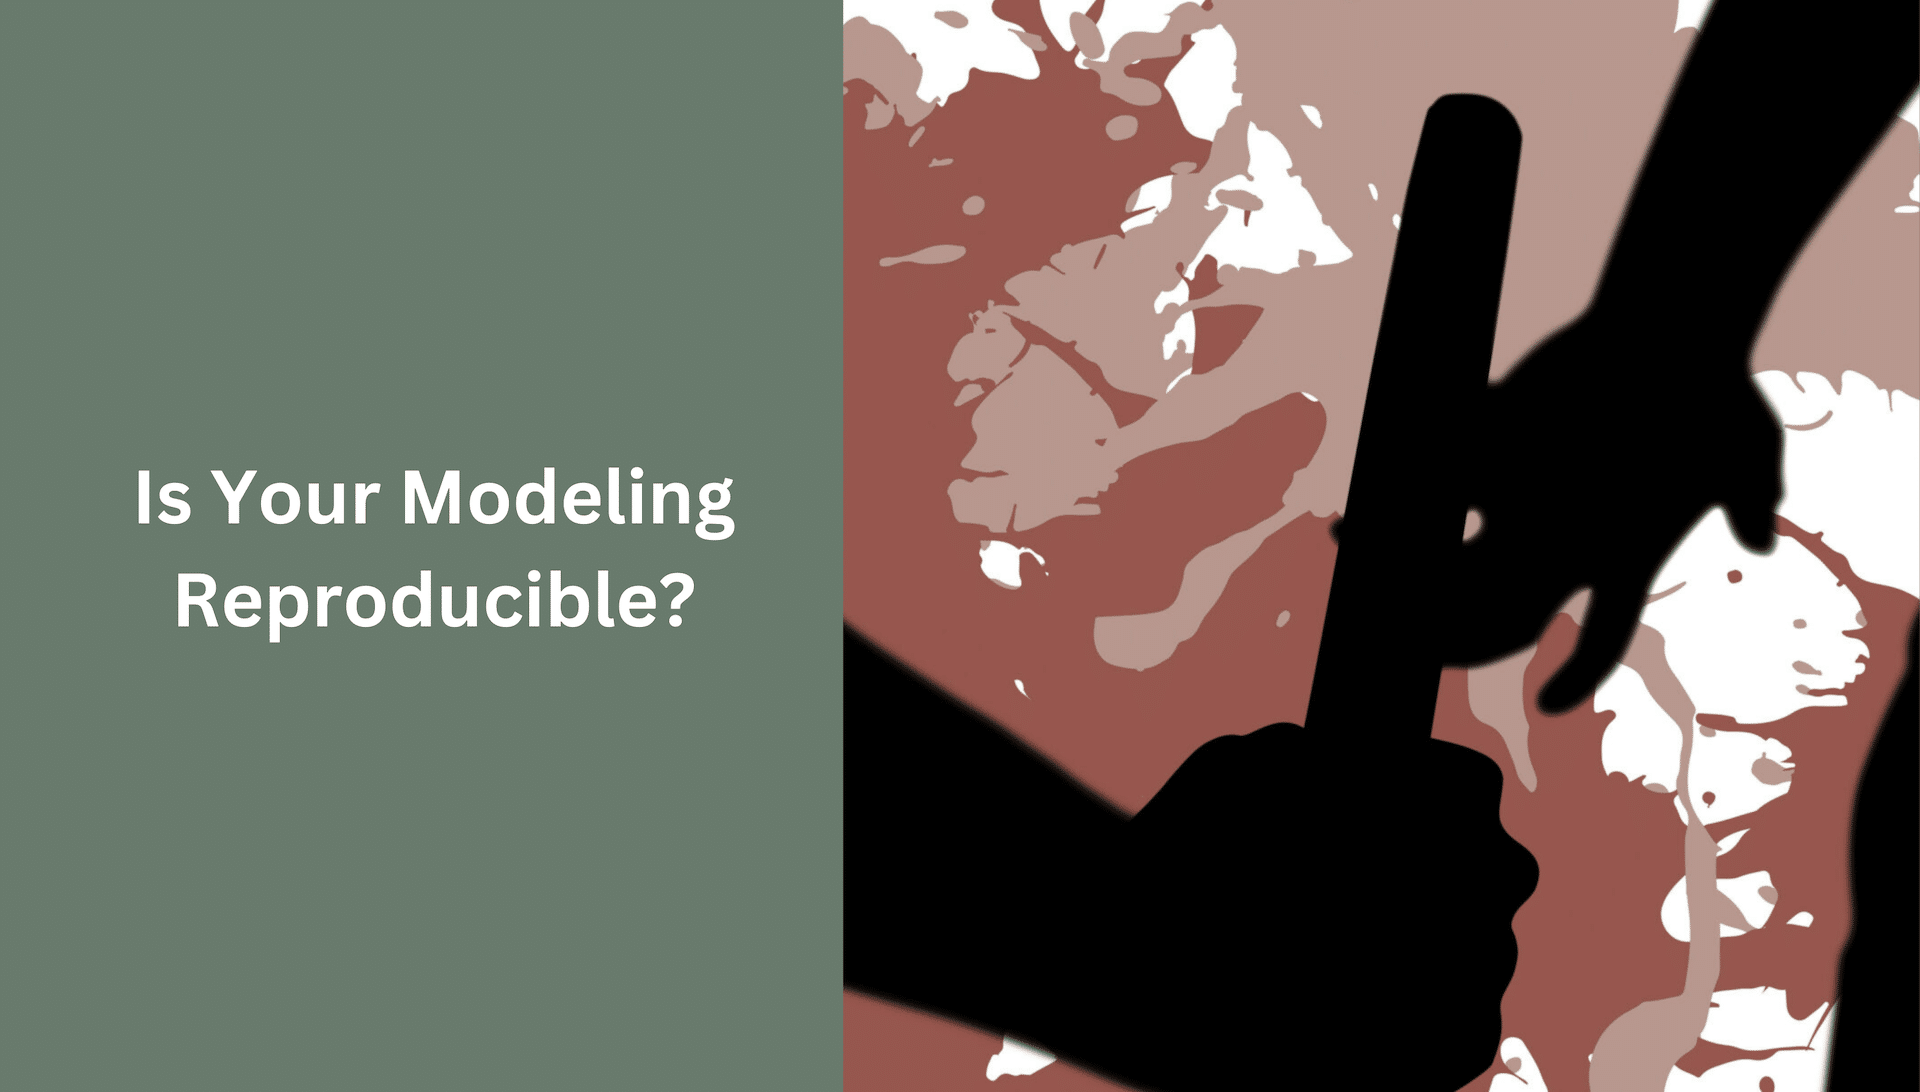 Is Your Modeling Reproducible?